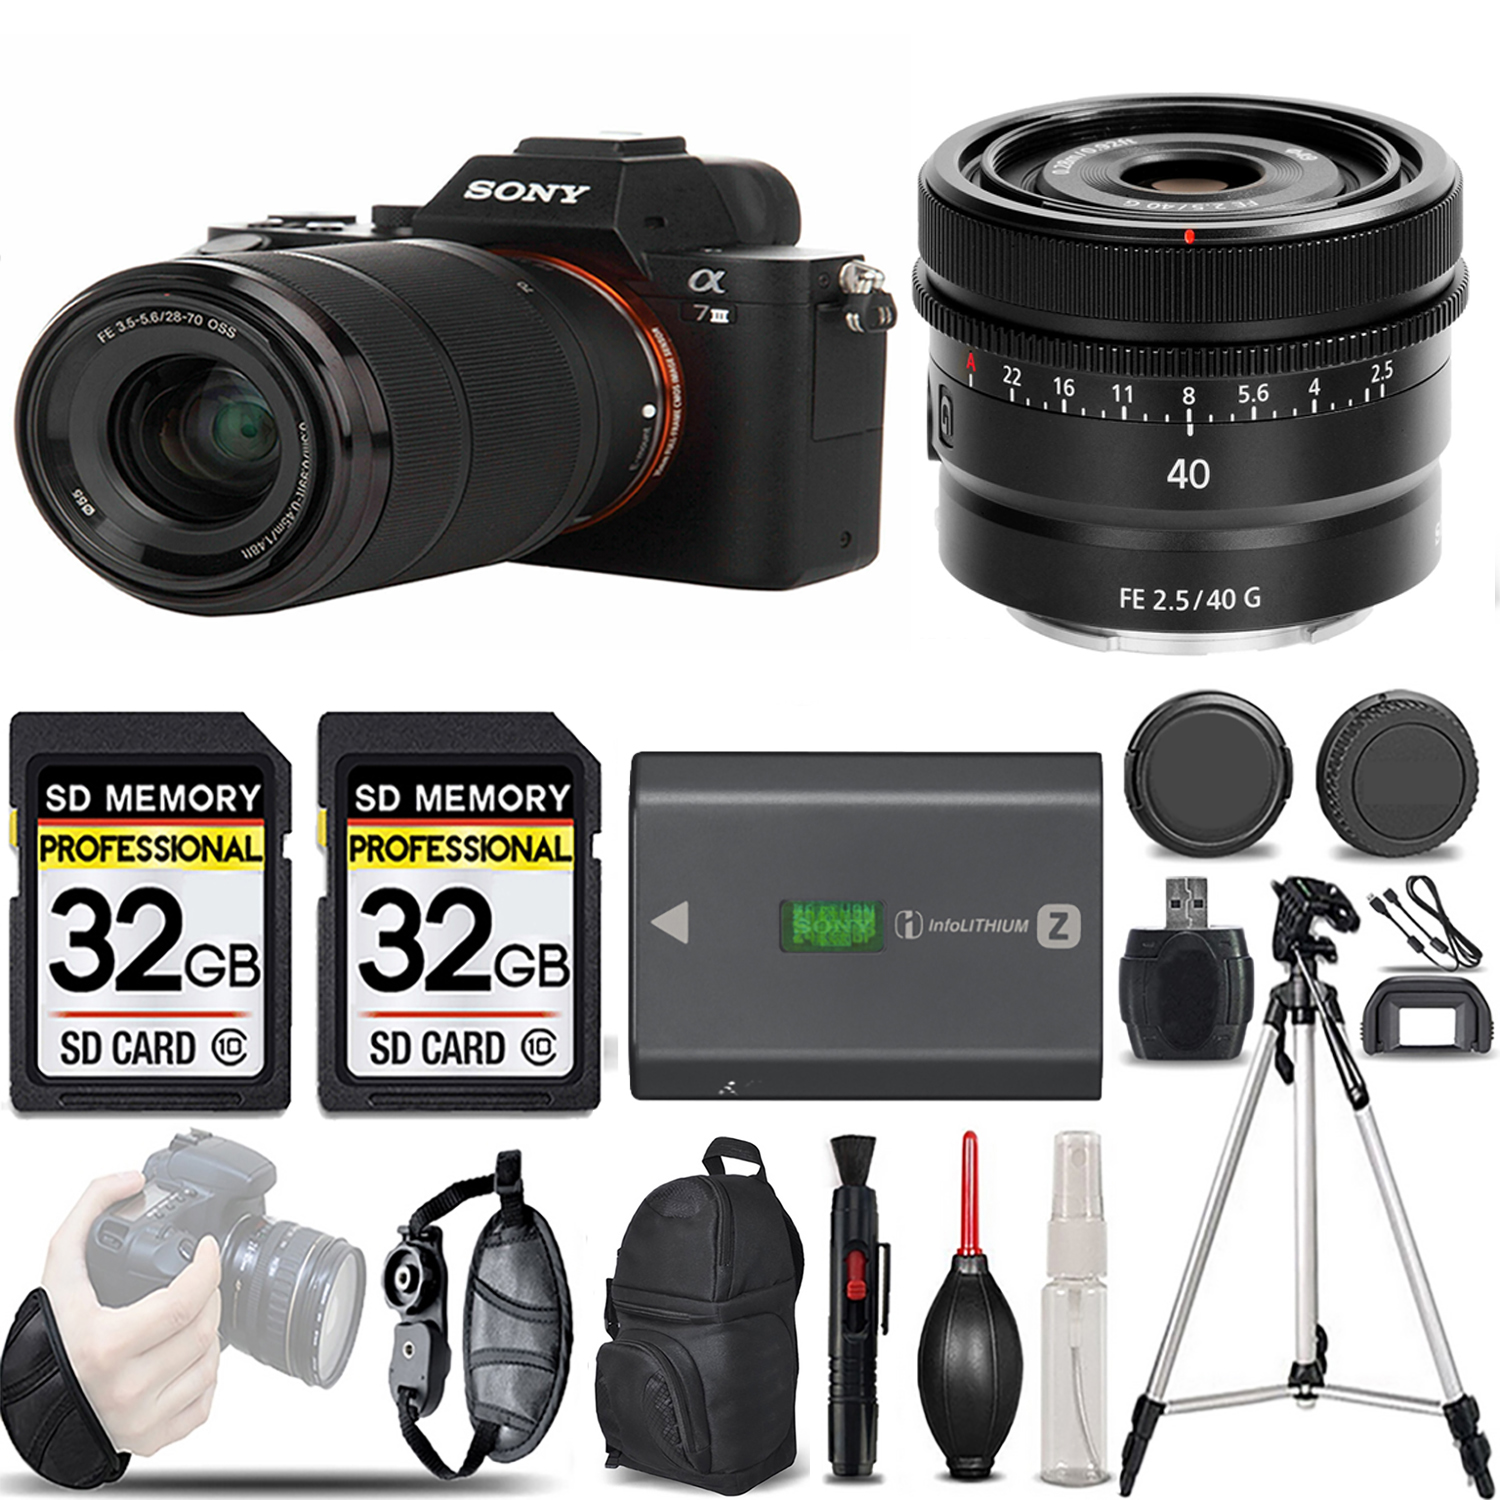 a7 III  Camera + 28-70mm Lens + 40mm Lens + Extra Battery + 64GB -Basic Kit *FREE SHIPPING*